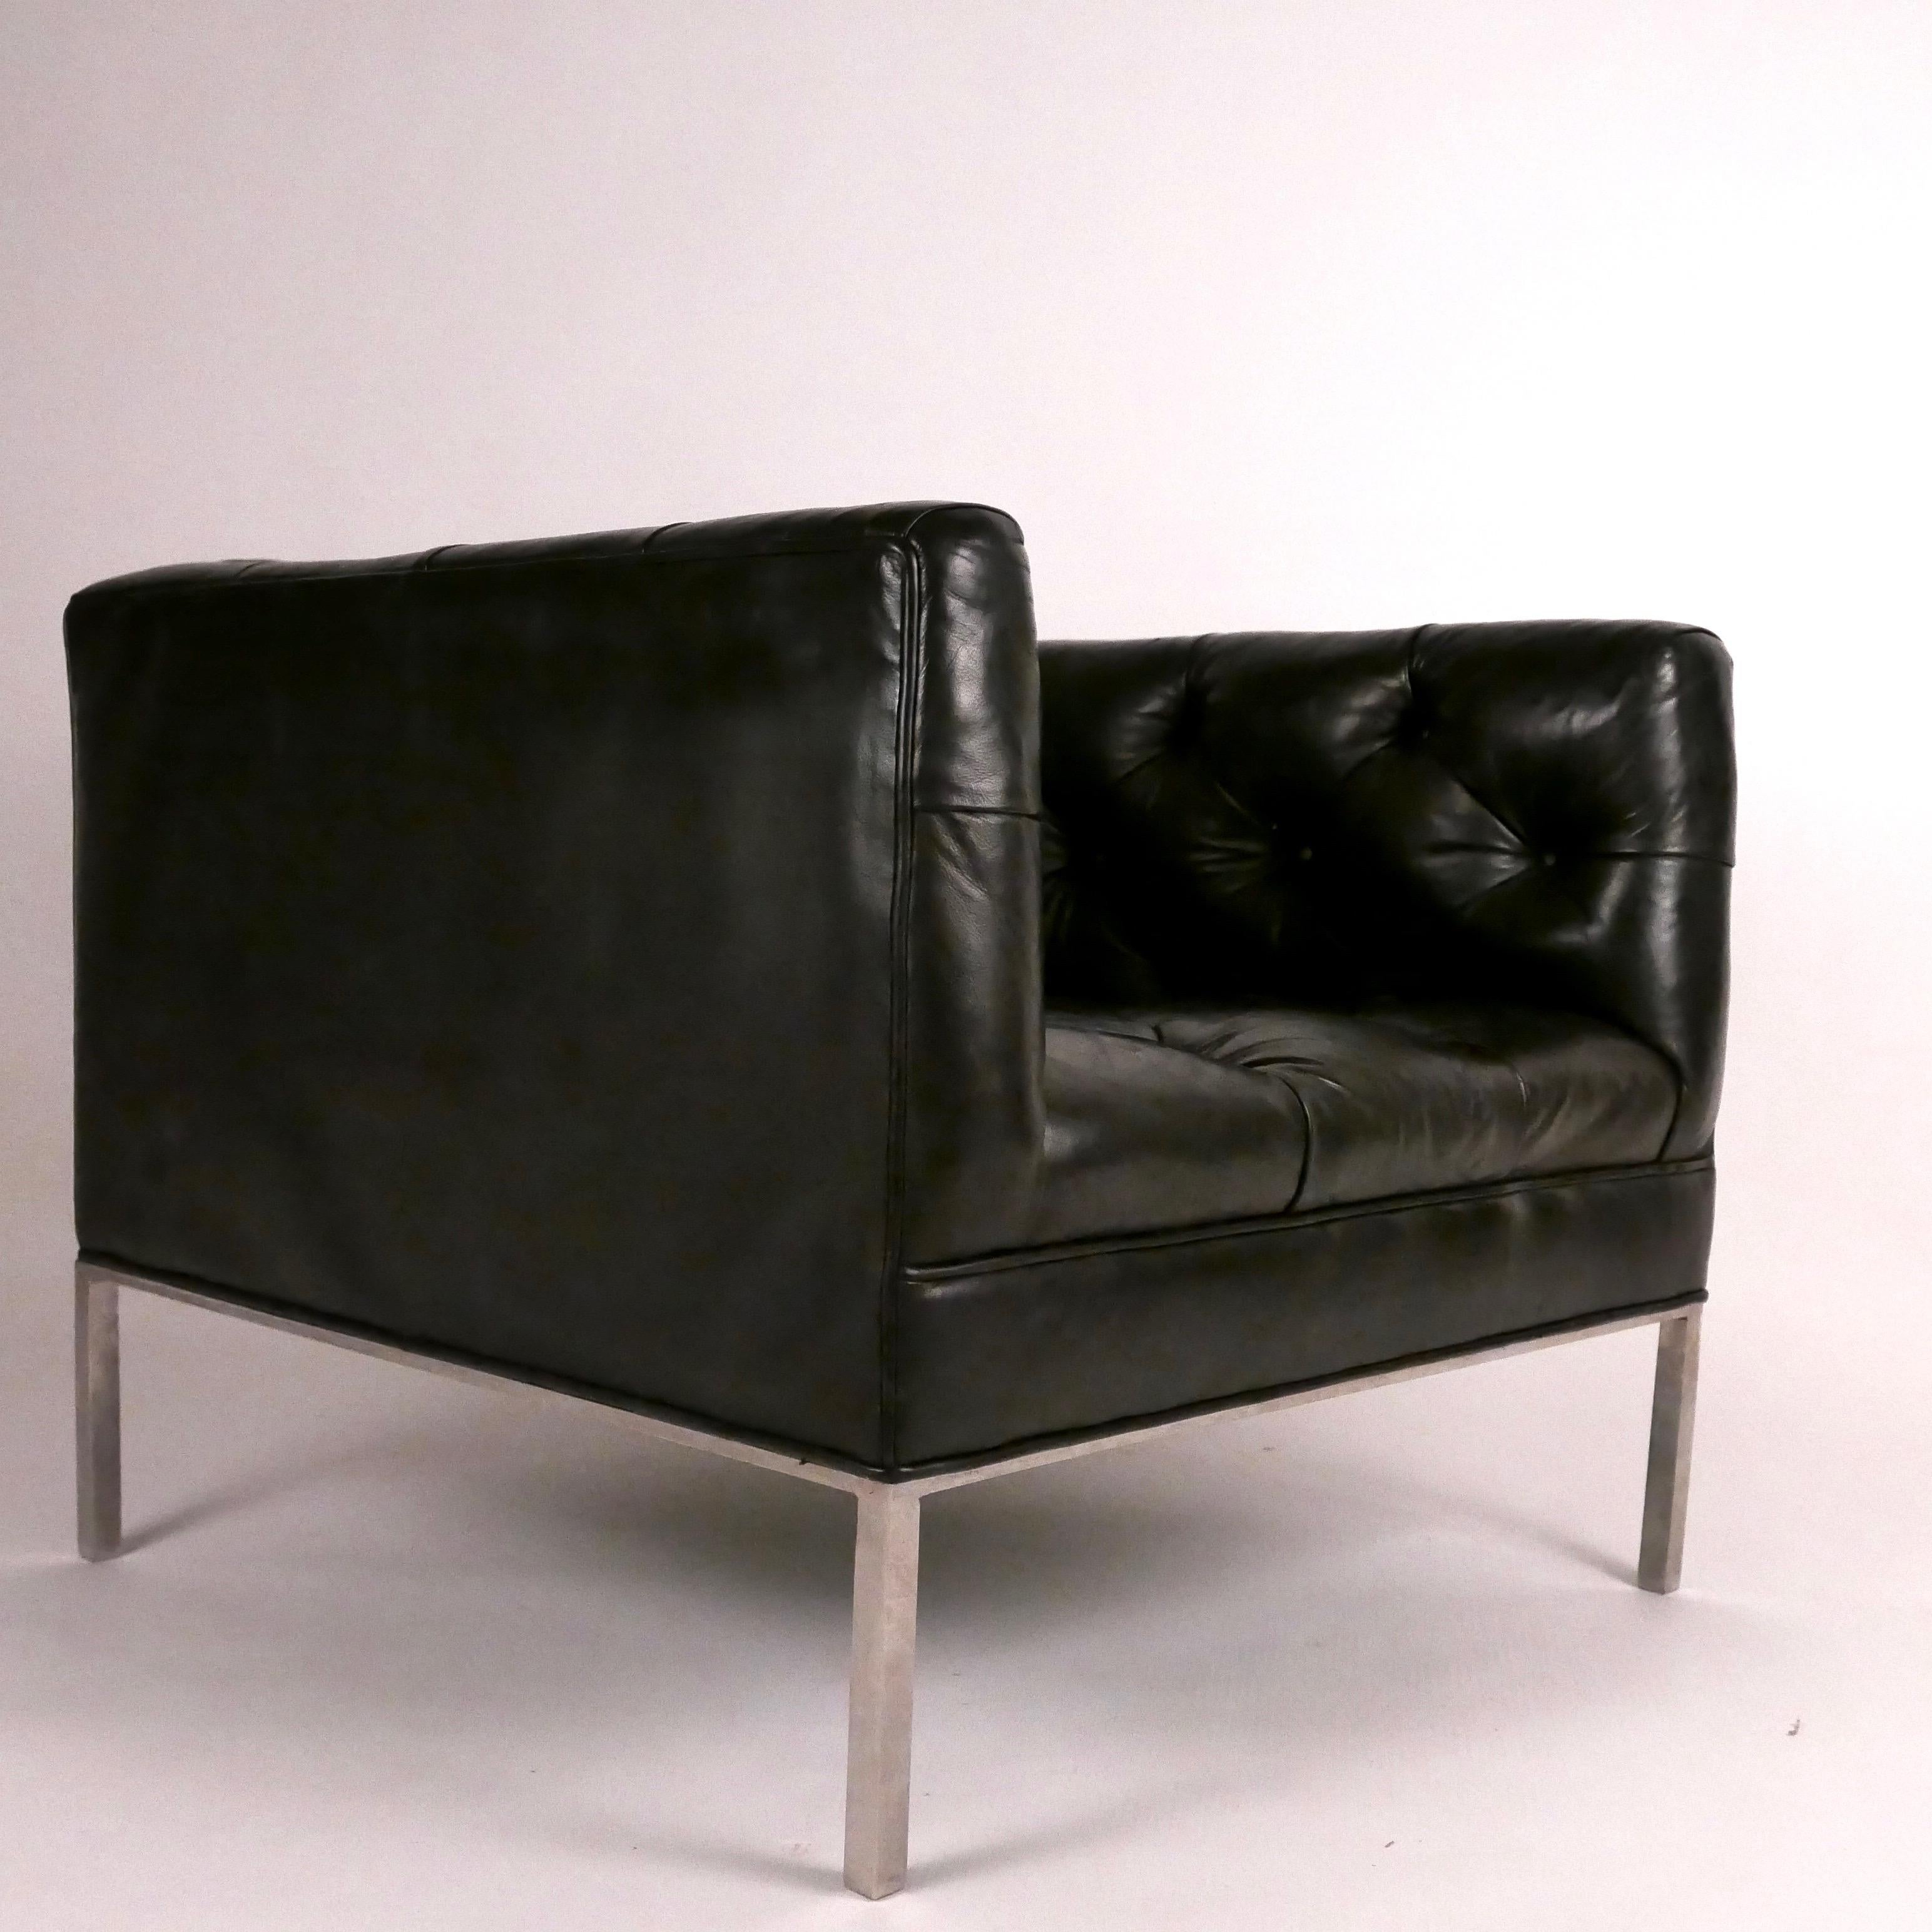 American Architect Pair of Tufted Leather and Solid Stainless Steel Tuxedo Club Chairs